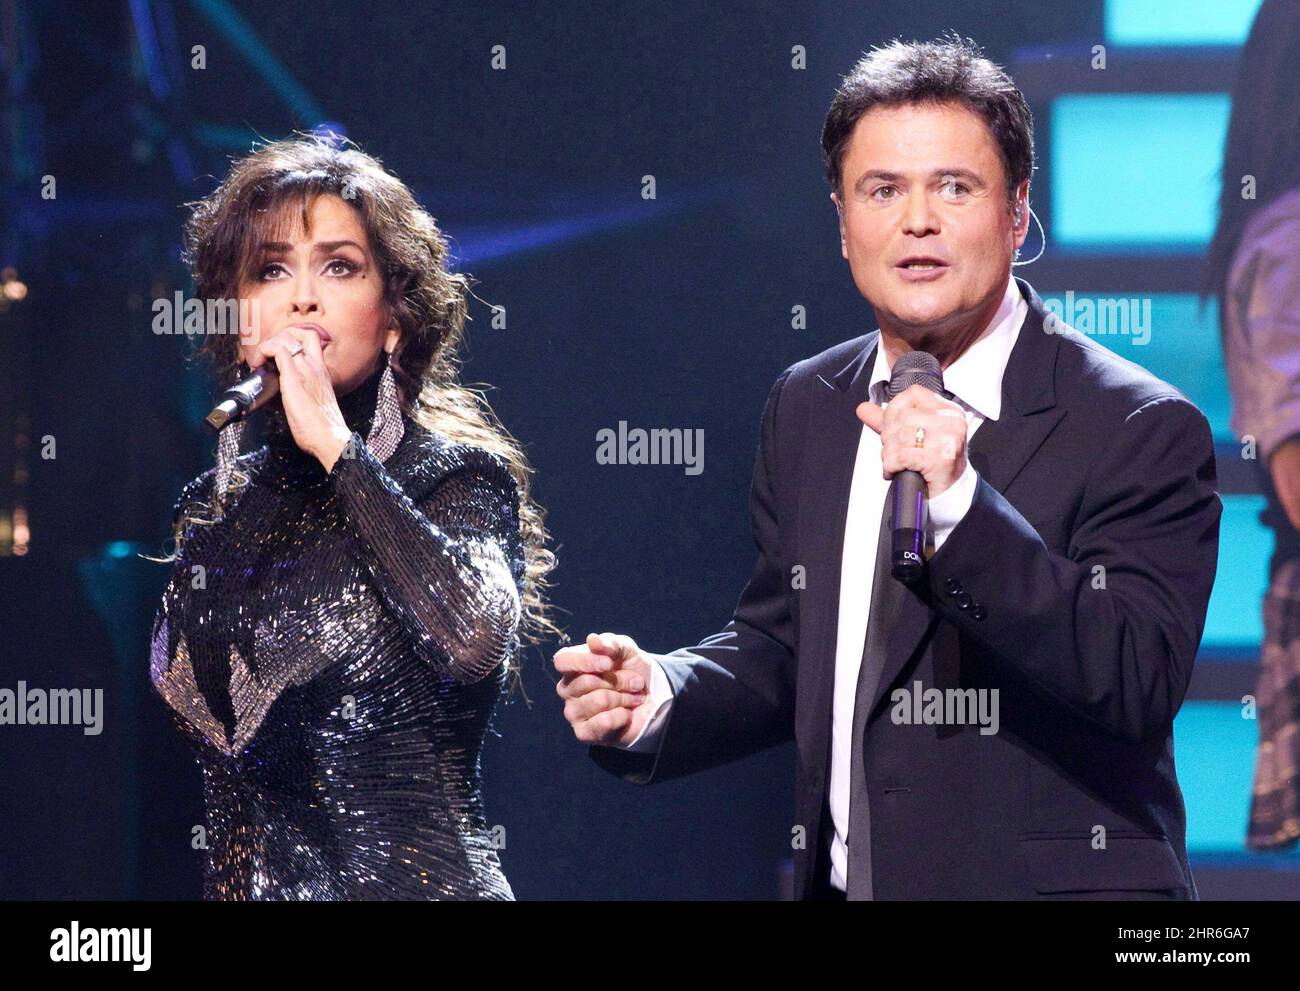 Donny and Marie Osmond perform in Toronto on July 6, 2011. The brother and sister act are bringing their wholesome brand of holiday cheer to Toronto for a two-week engagement this Christmas. THE CANADIAN PRESS/Chris Young Stock Photo